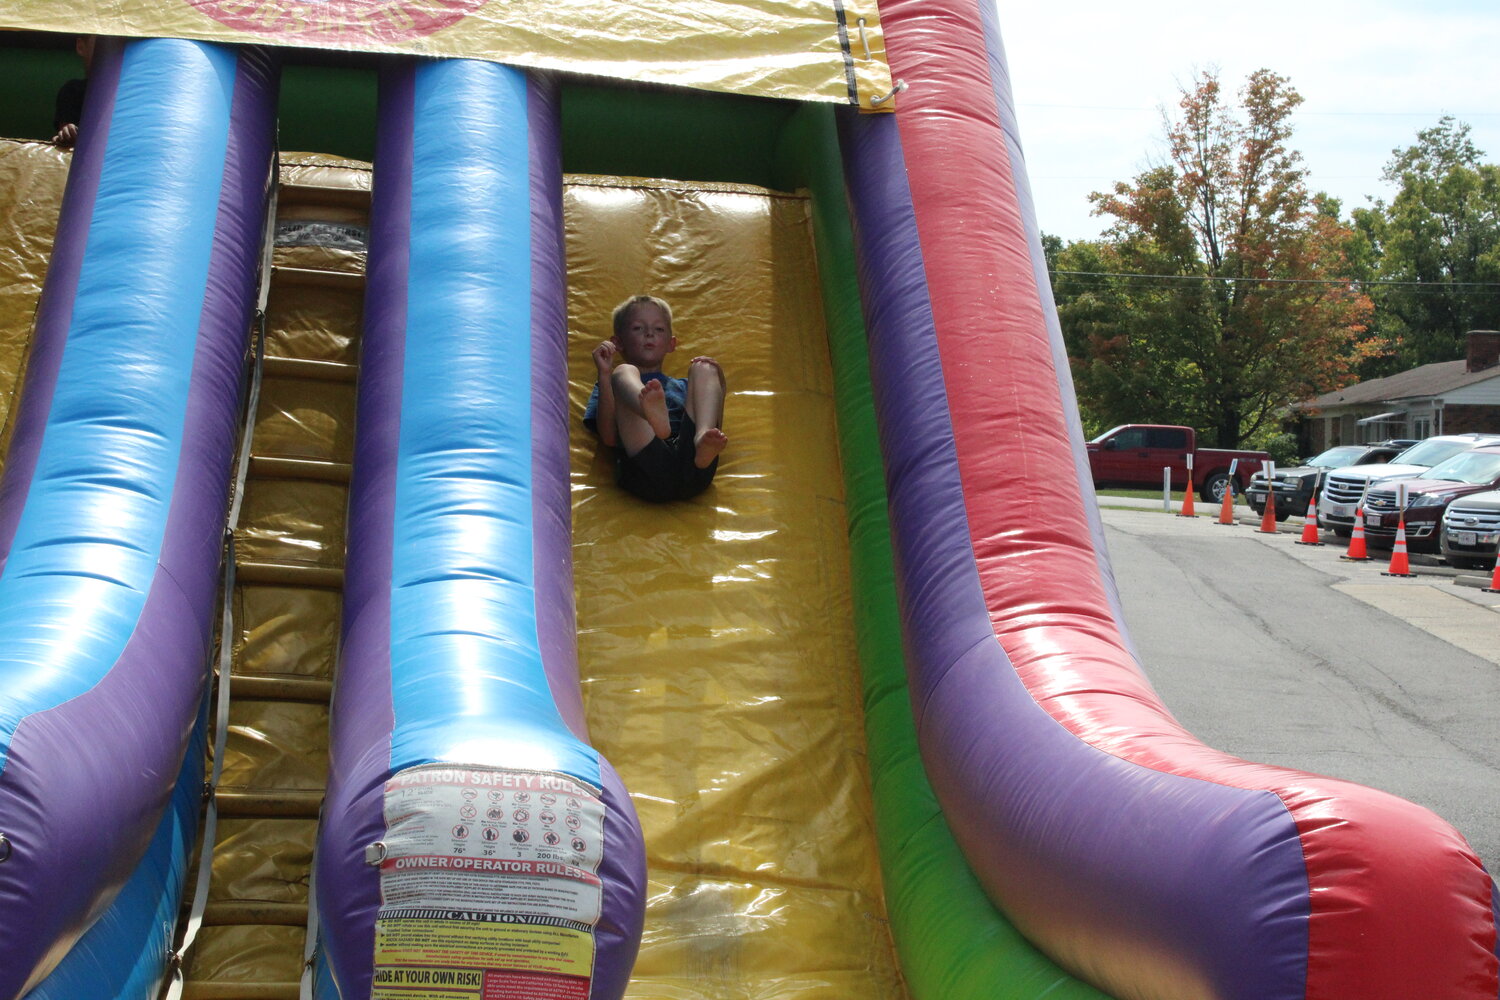 A boy takes the slide in the children's area of the Fall Festival.